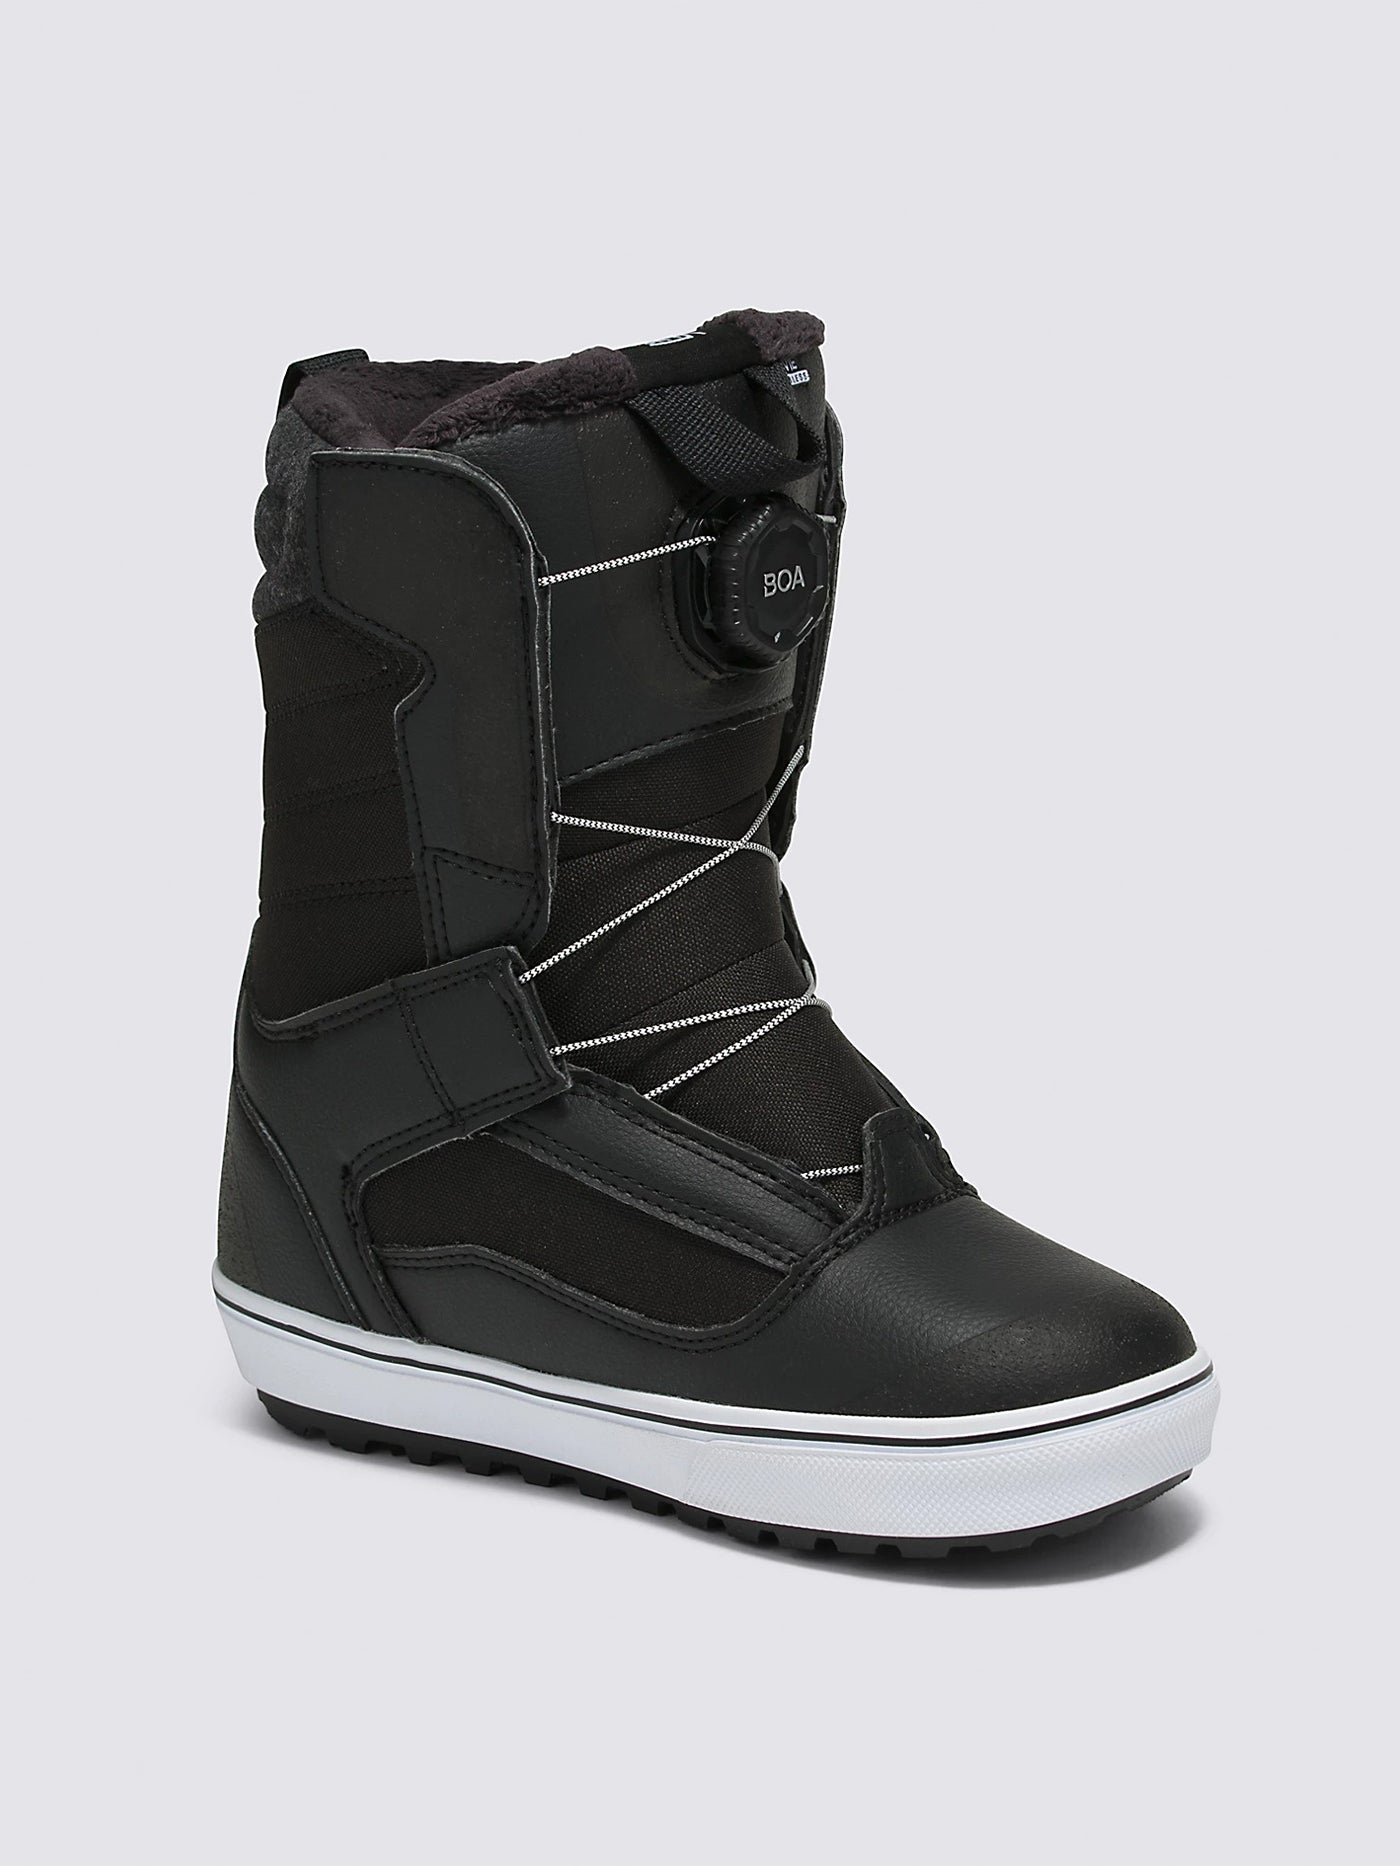 Juvie Linerless Black/White Snowboard Boots (Youth 7-14)